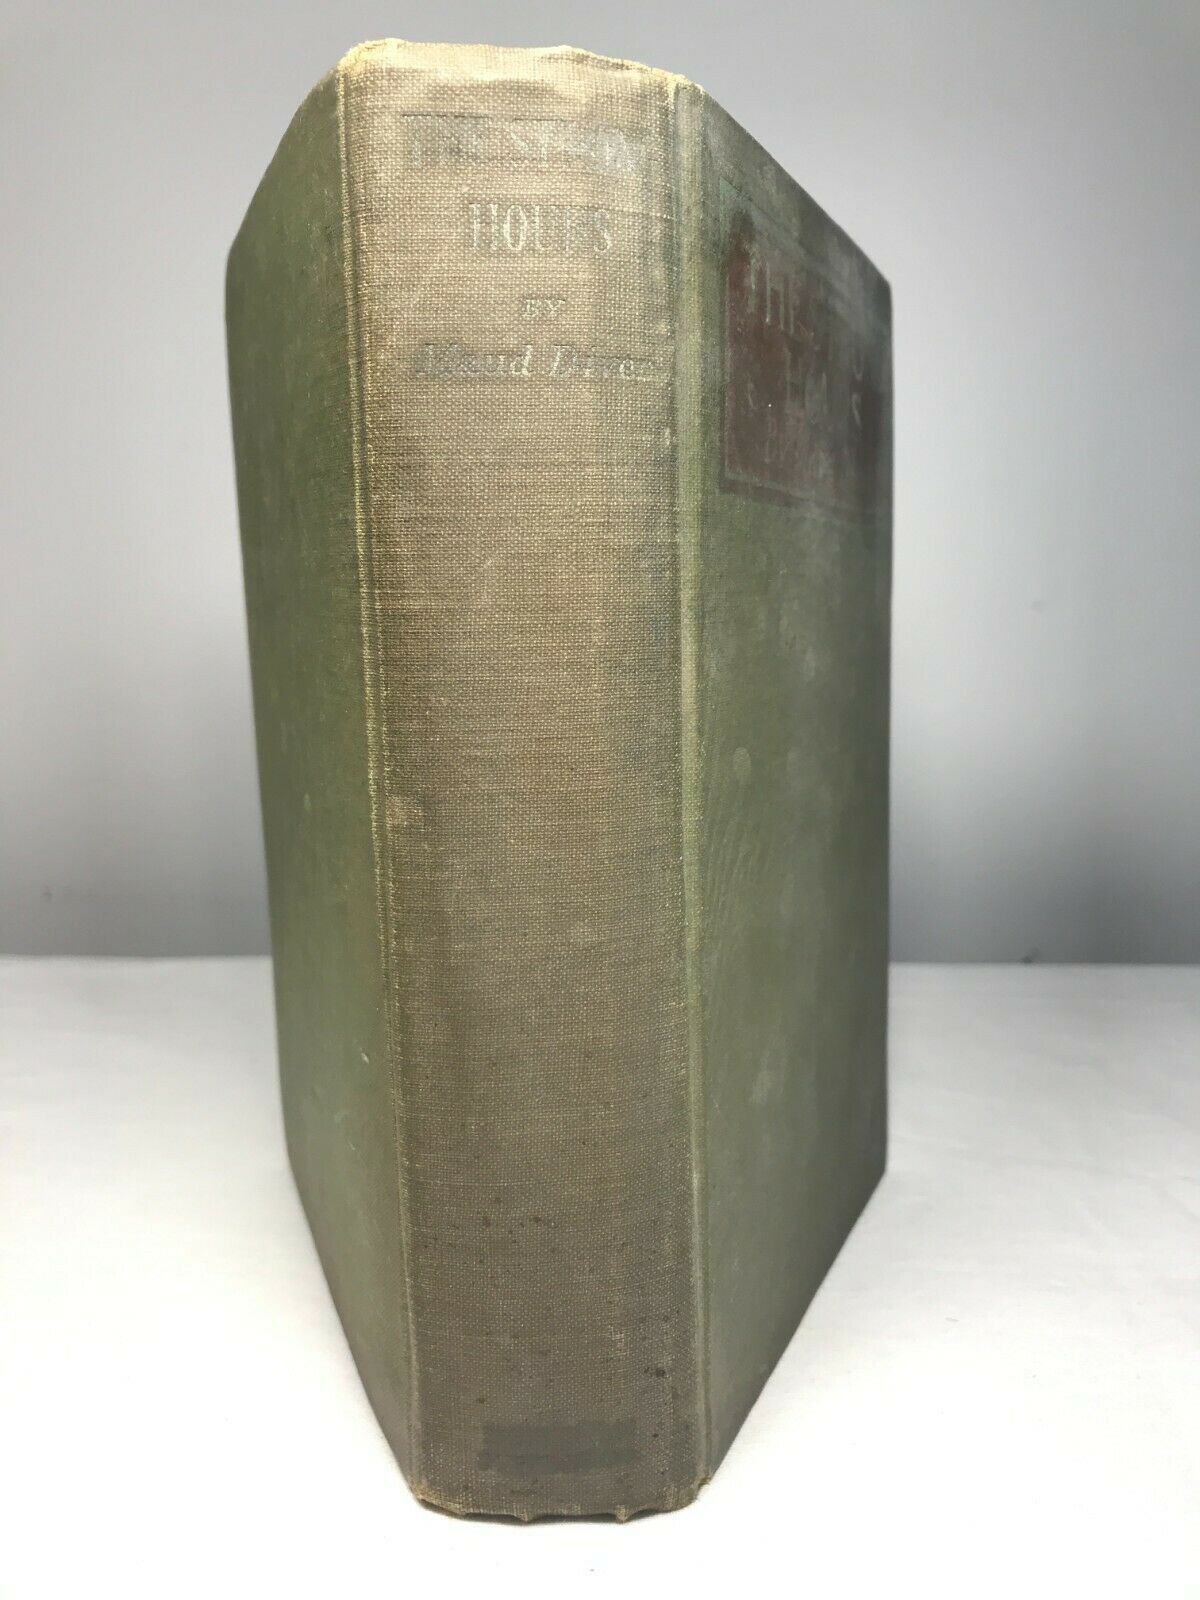 The Strong Hours by Maud Diver hardcover 1919 Antique Book